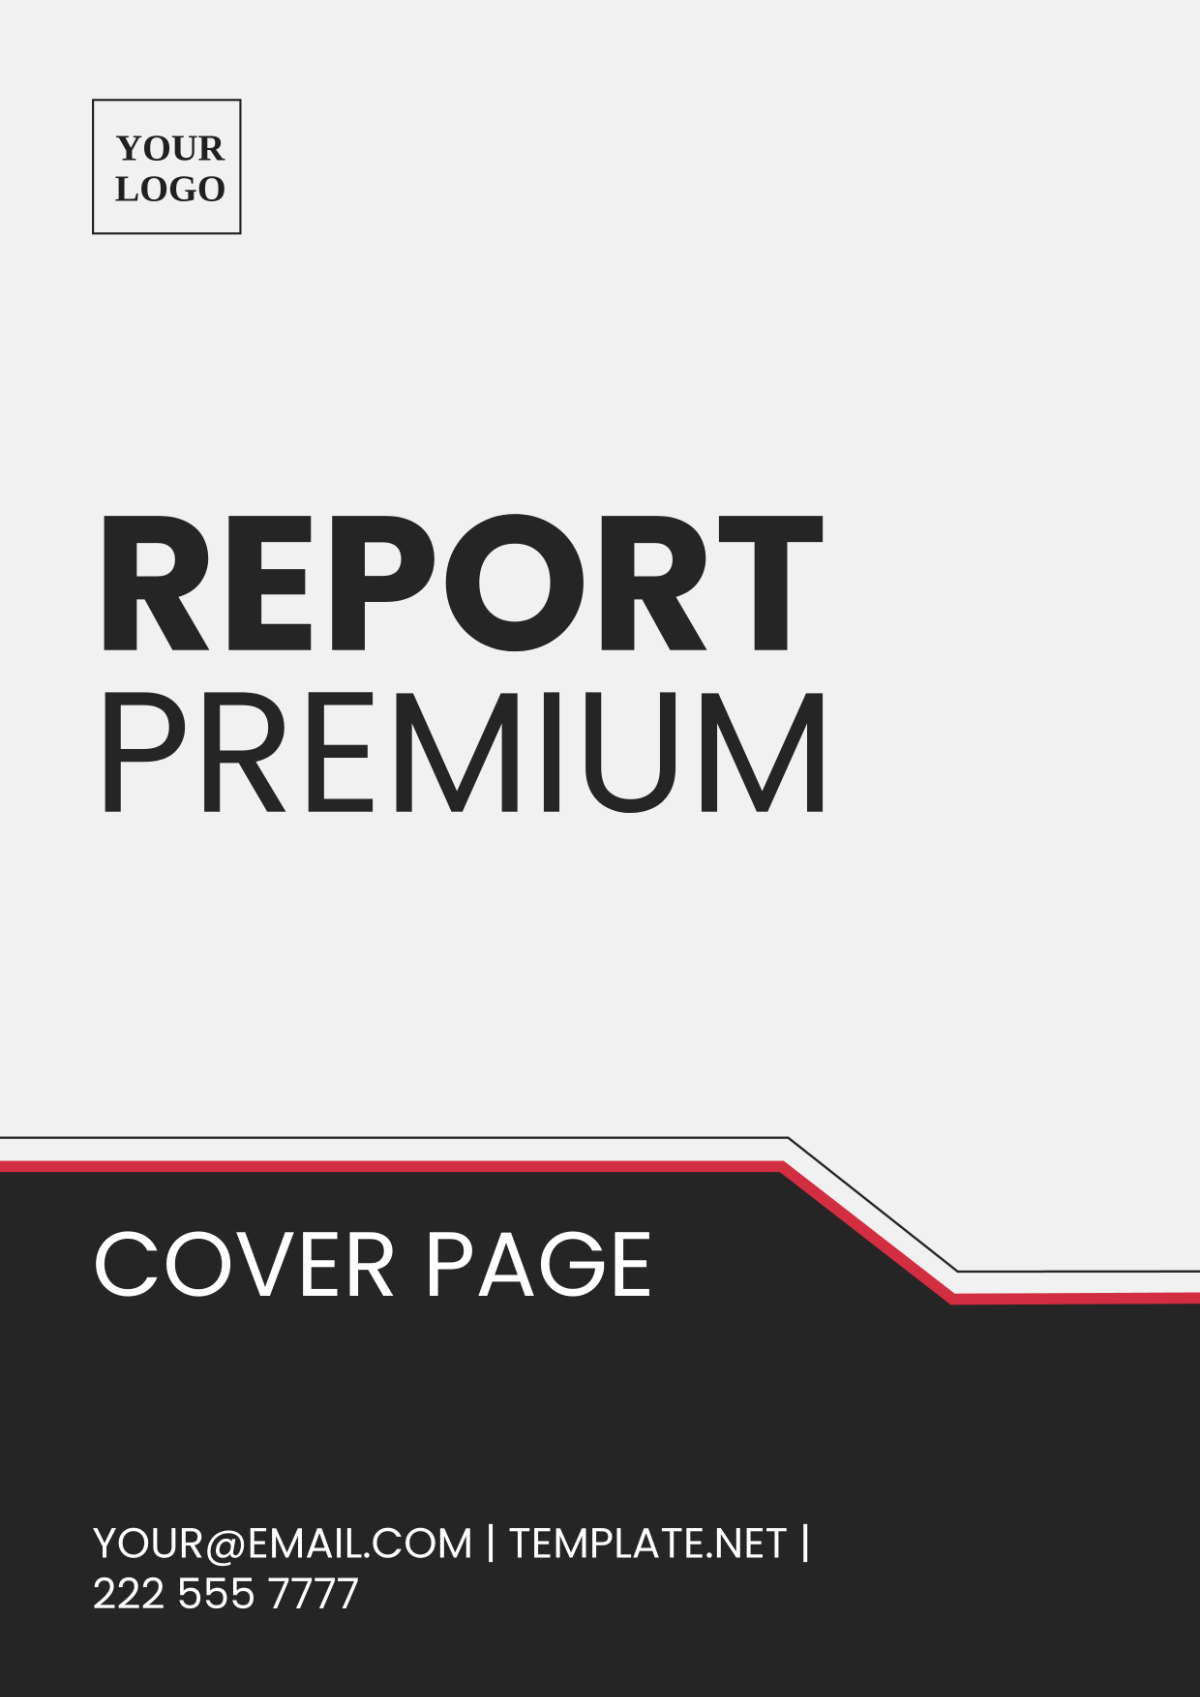 Report Premium Cover Page Template